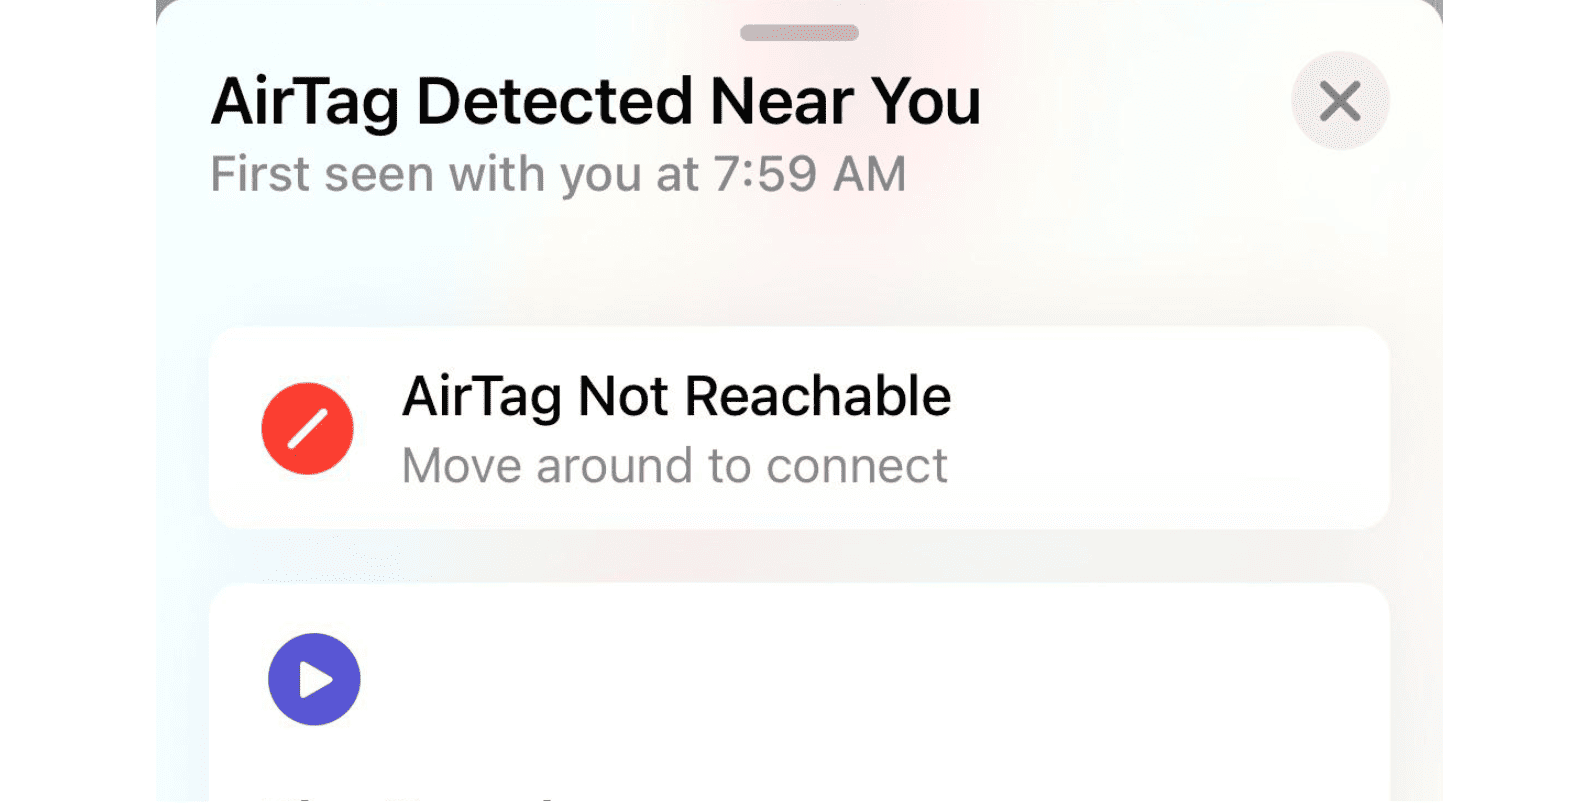 How to avoid unwanted tracking if an unknown AirTag is moving with you